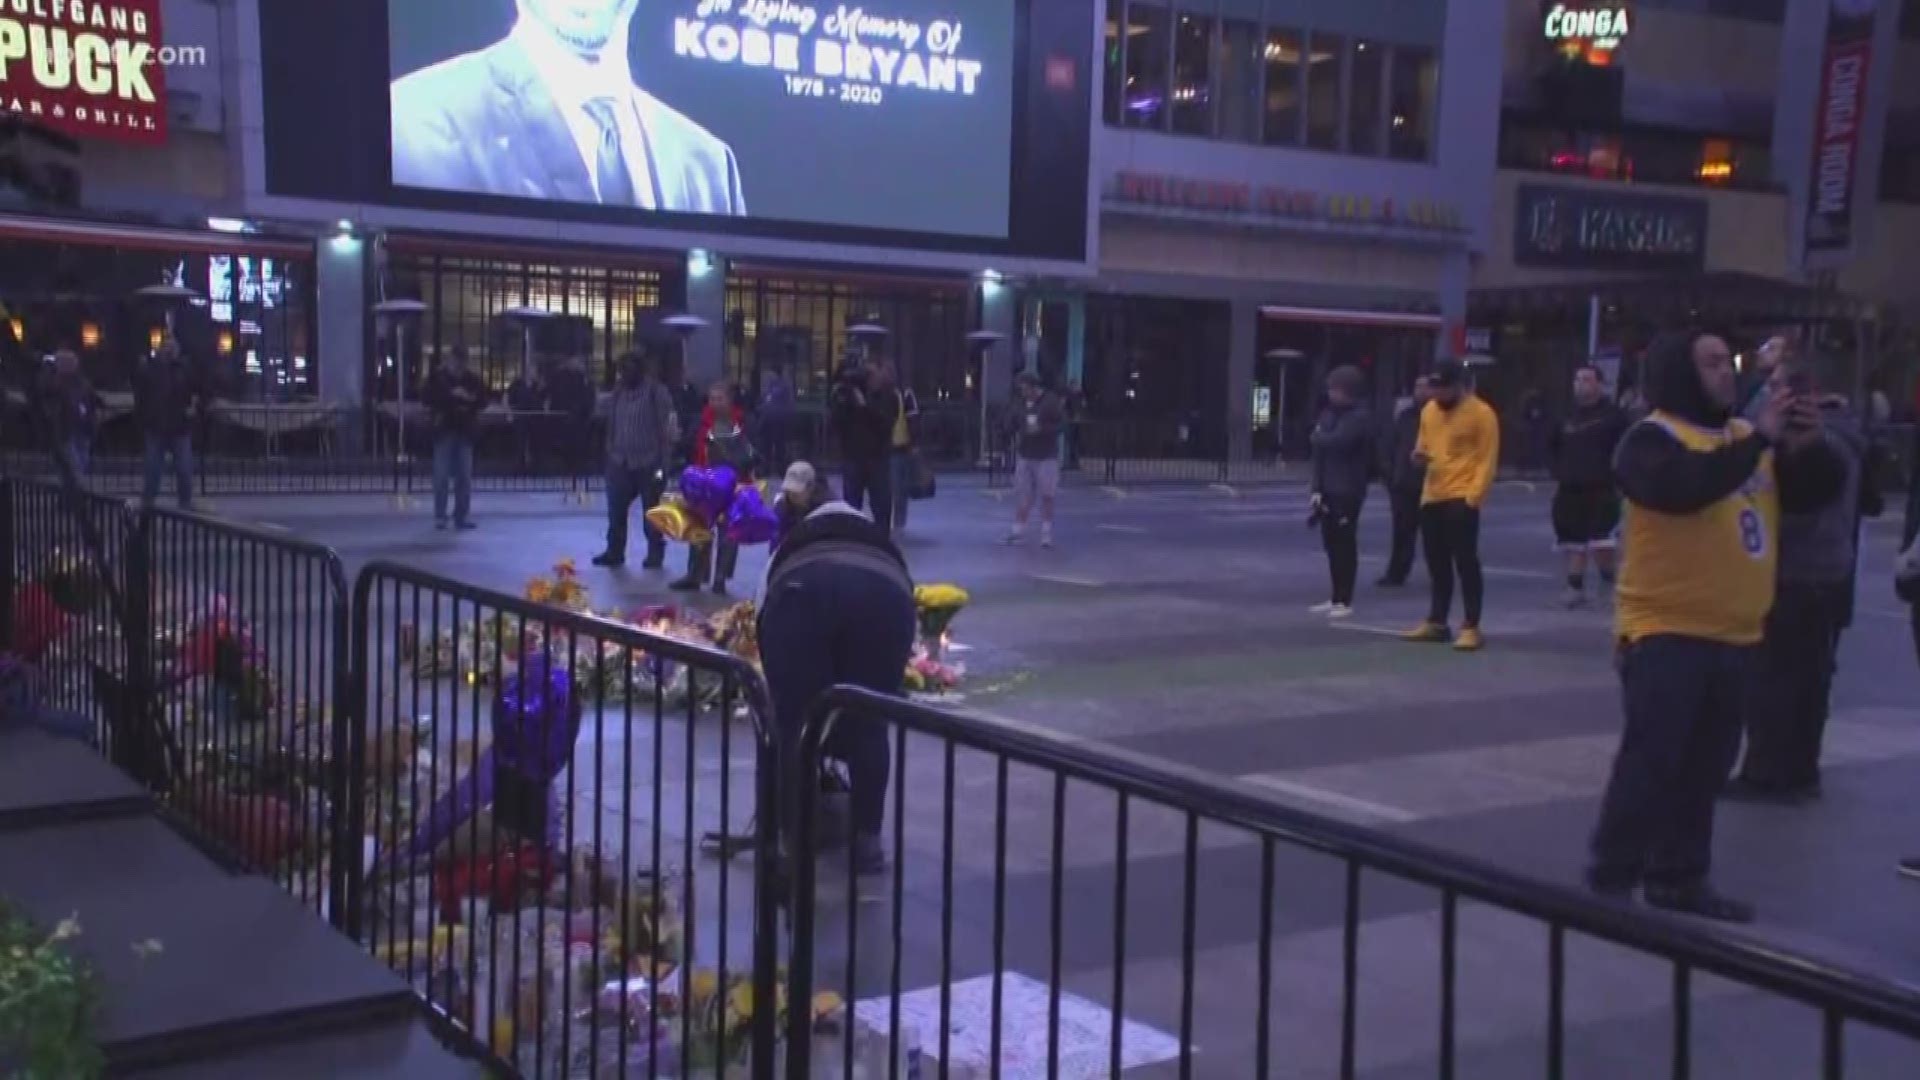 Thousands have made their way to the Staples Center in Los Angeles upon hearing news of Kobe Bryant's death. There a shrine memorializing the NBA legend grows.